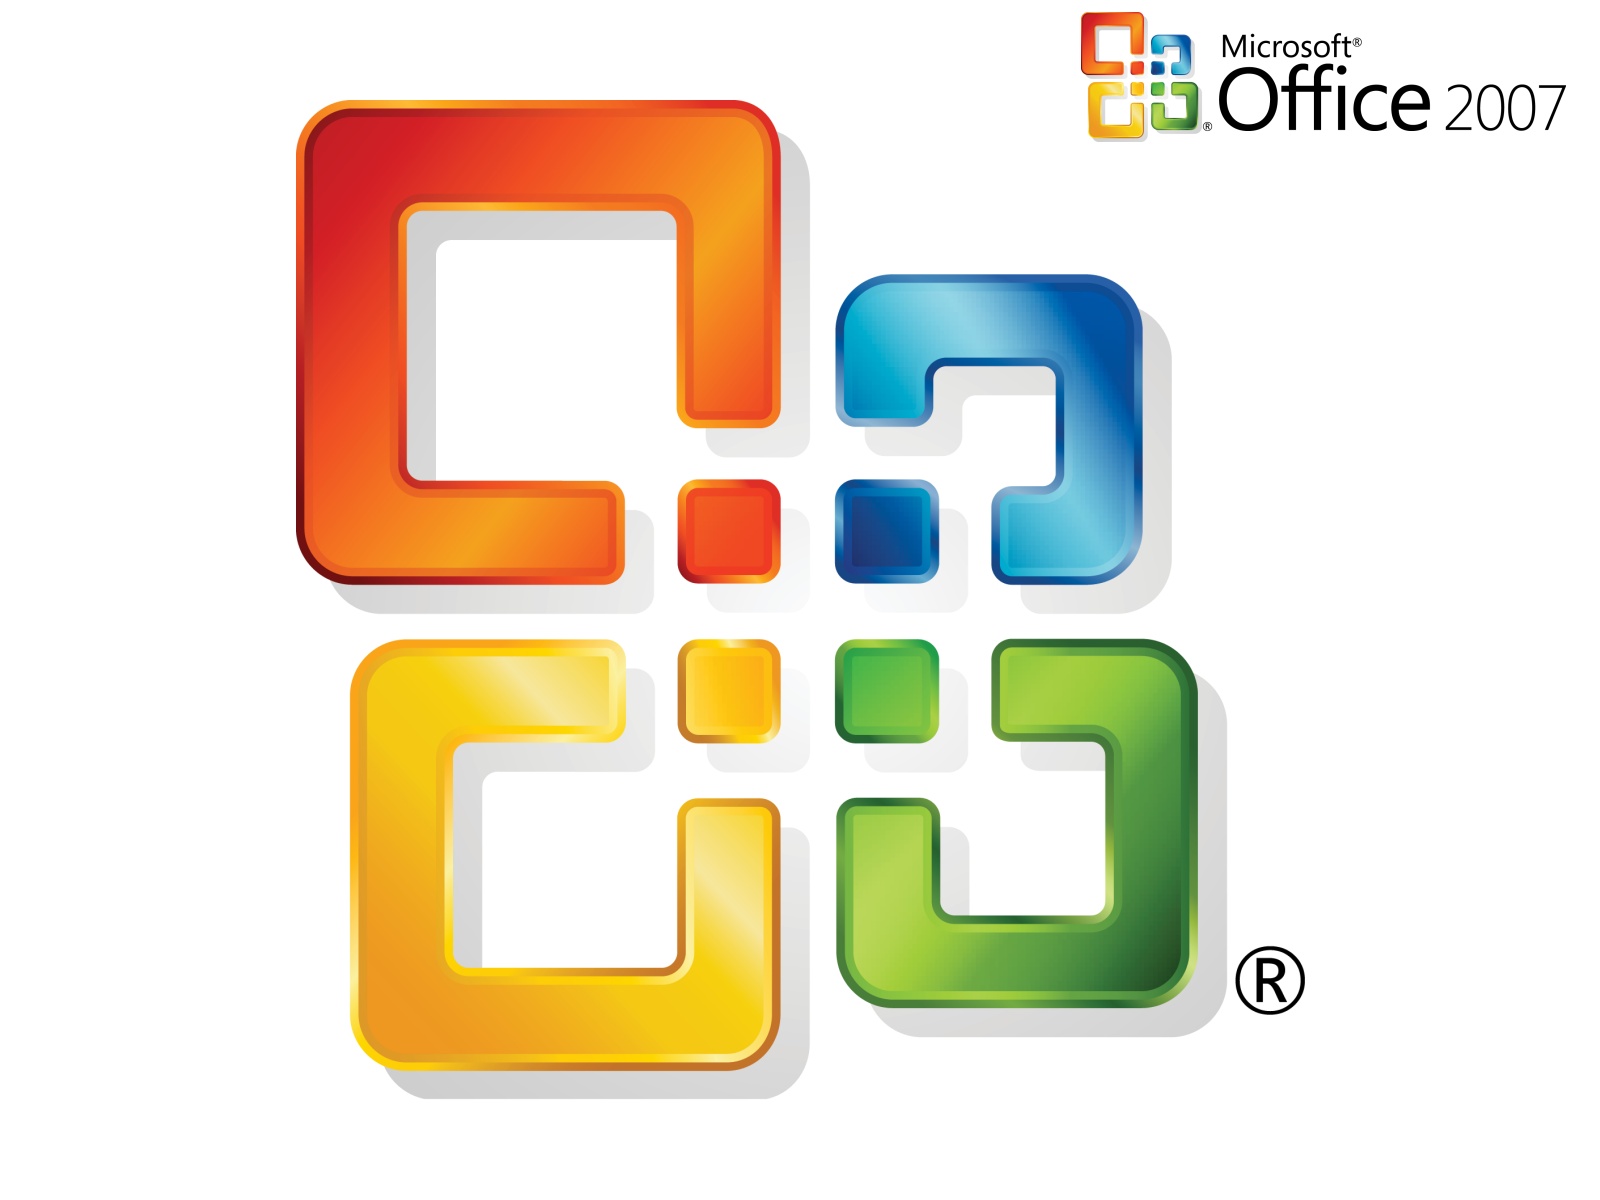 Microsoft Office 2007 Icon At Collection Of Microsoft